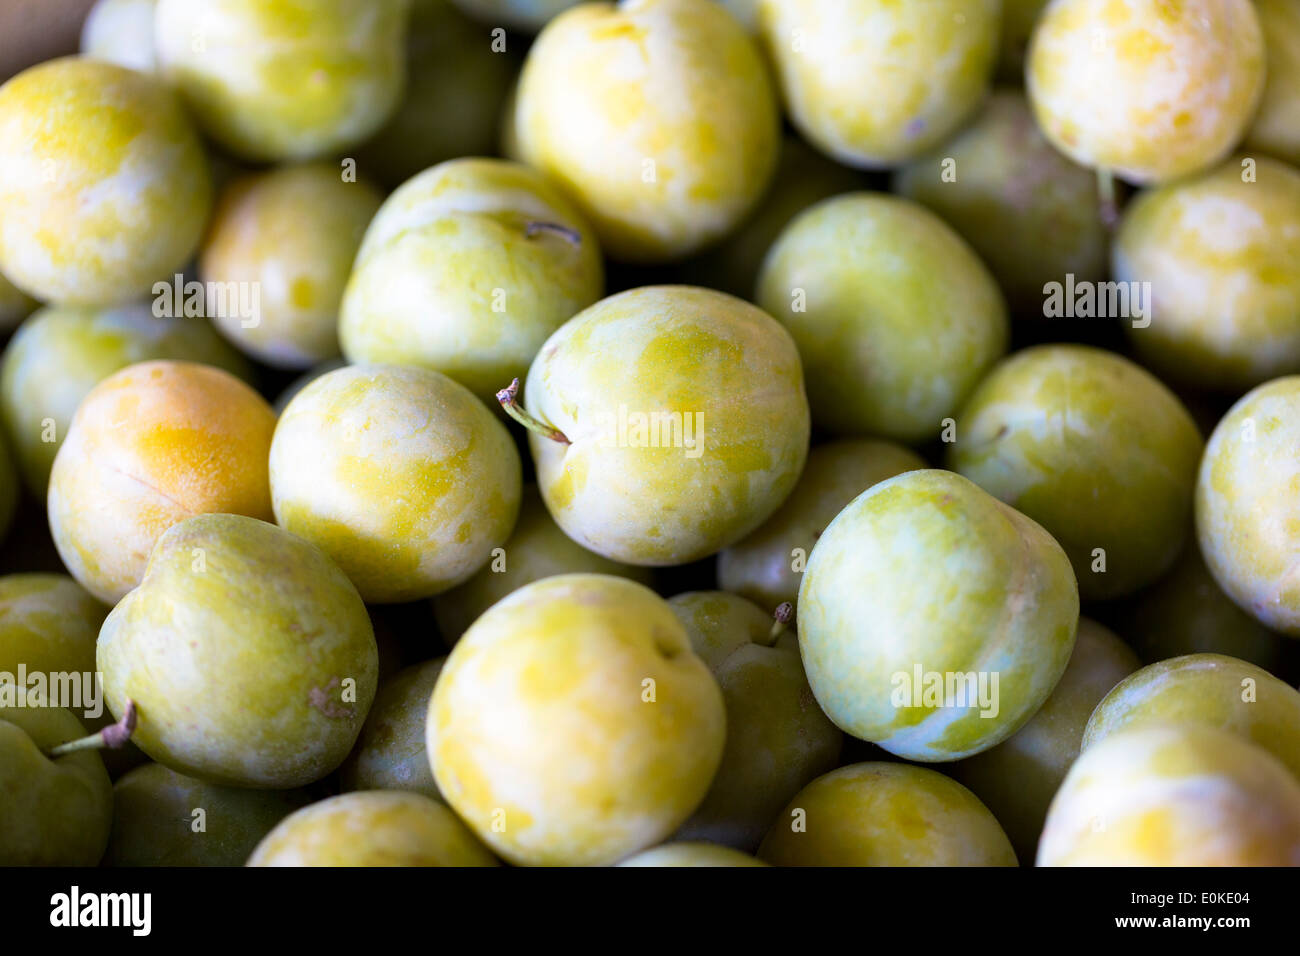 Locally-grown freshly-picked greengages - Reine Claude - fruit displayed for sale in Pays de La Loire, Loire Valley, France Stock Photo